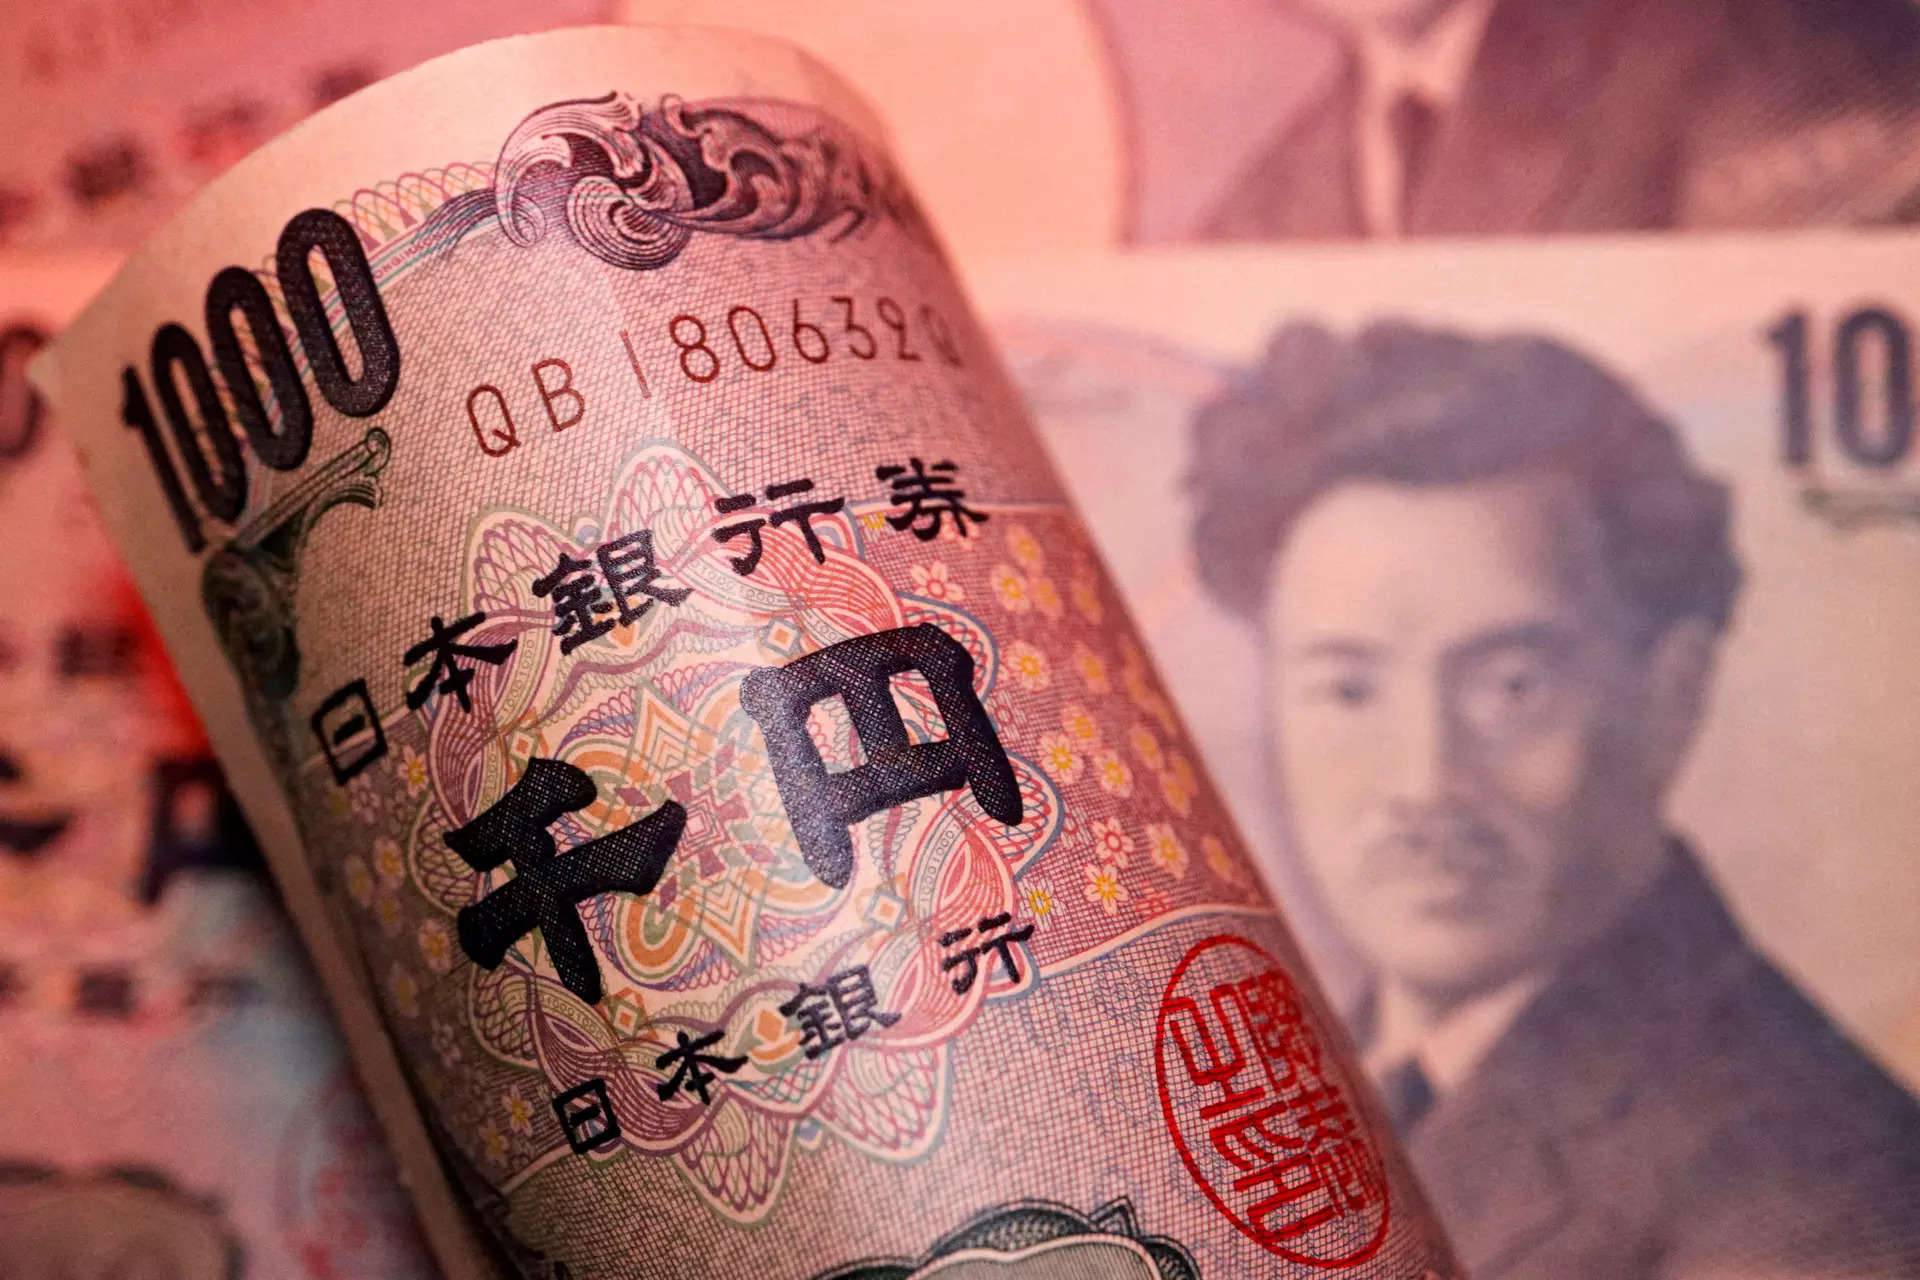 What would Japanese intervention to boost a weak yen look like? 